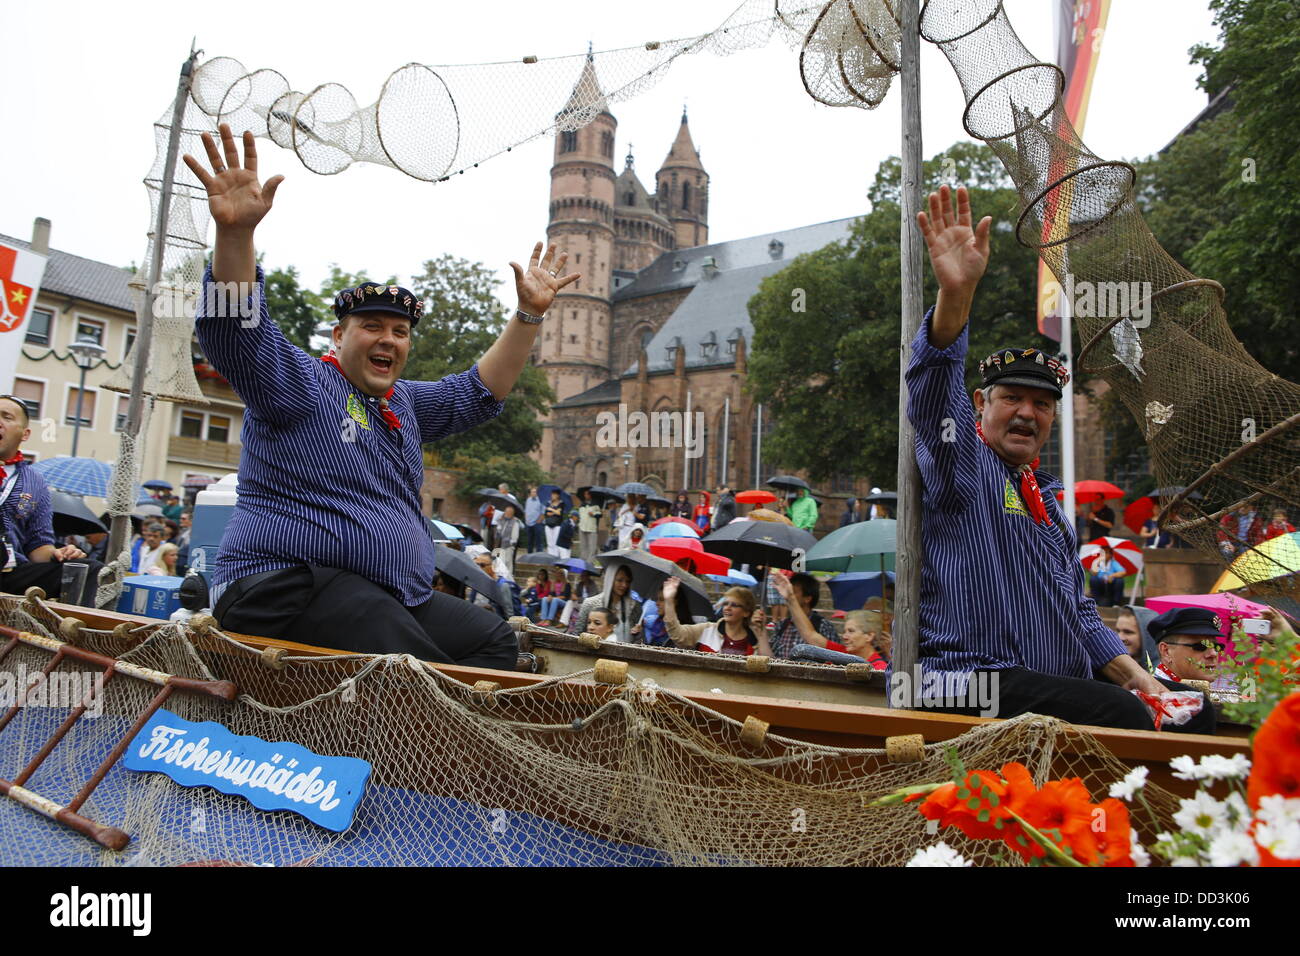 Worms, Germany. 25th August 2013. Members of the fishermen's guild are pictured in a wooden boat at the Backfischfest parade 2011. The cathedral of Worms can be seen in the background. The first highlight of this year's Backfischfest was the big parade through the city of Worms with over 100 groups and floats. Community groups, sport clubs, music groups and business from Worms and further afield took part. Credit:  Michael Debets/Alamy Live News Stock Photo